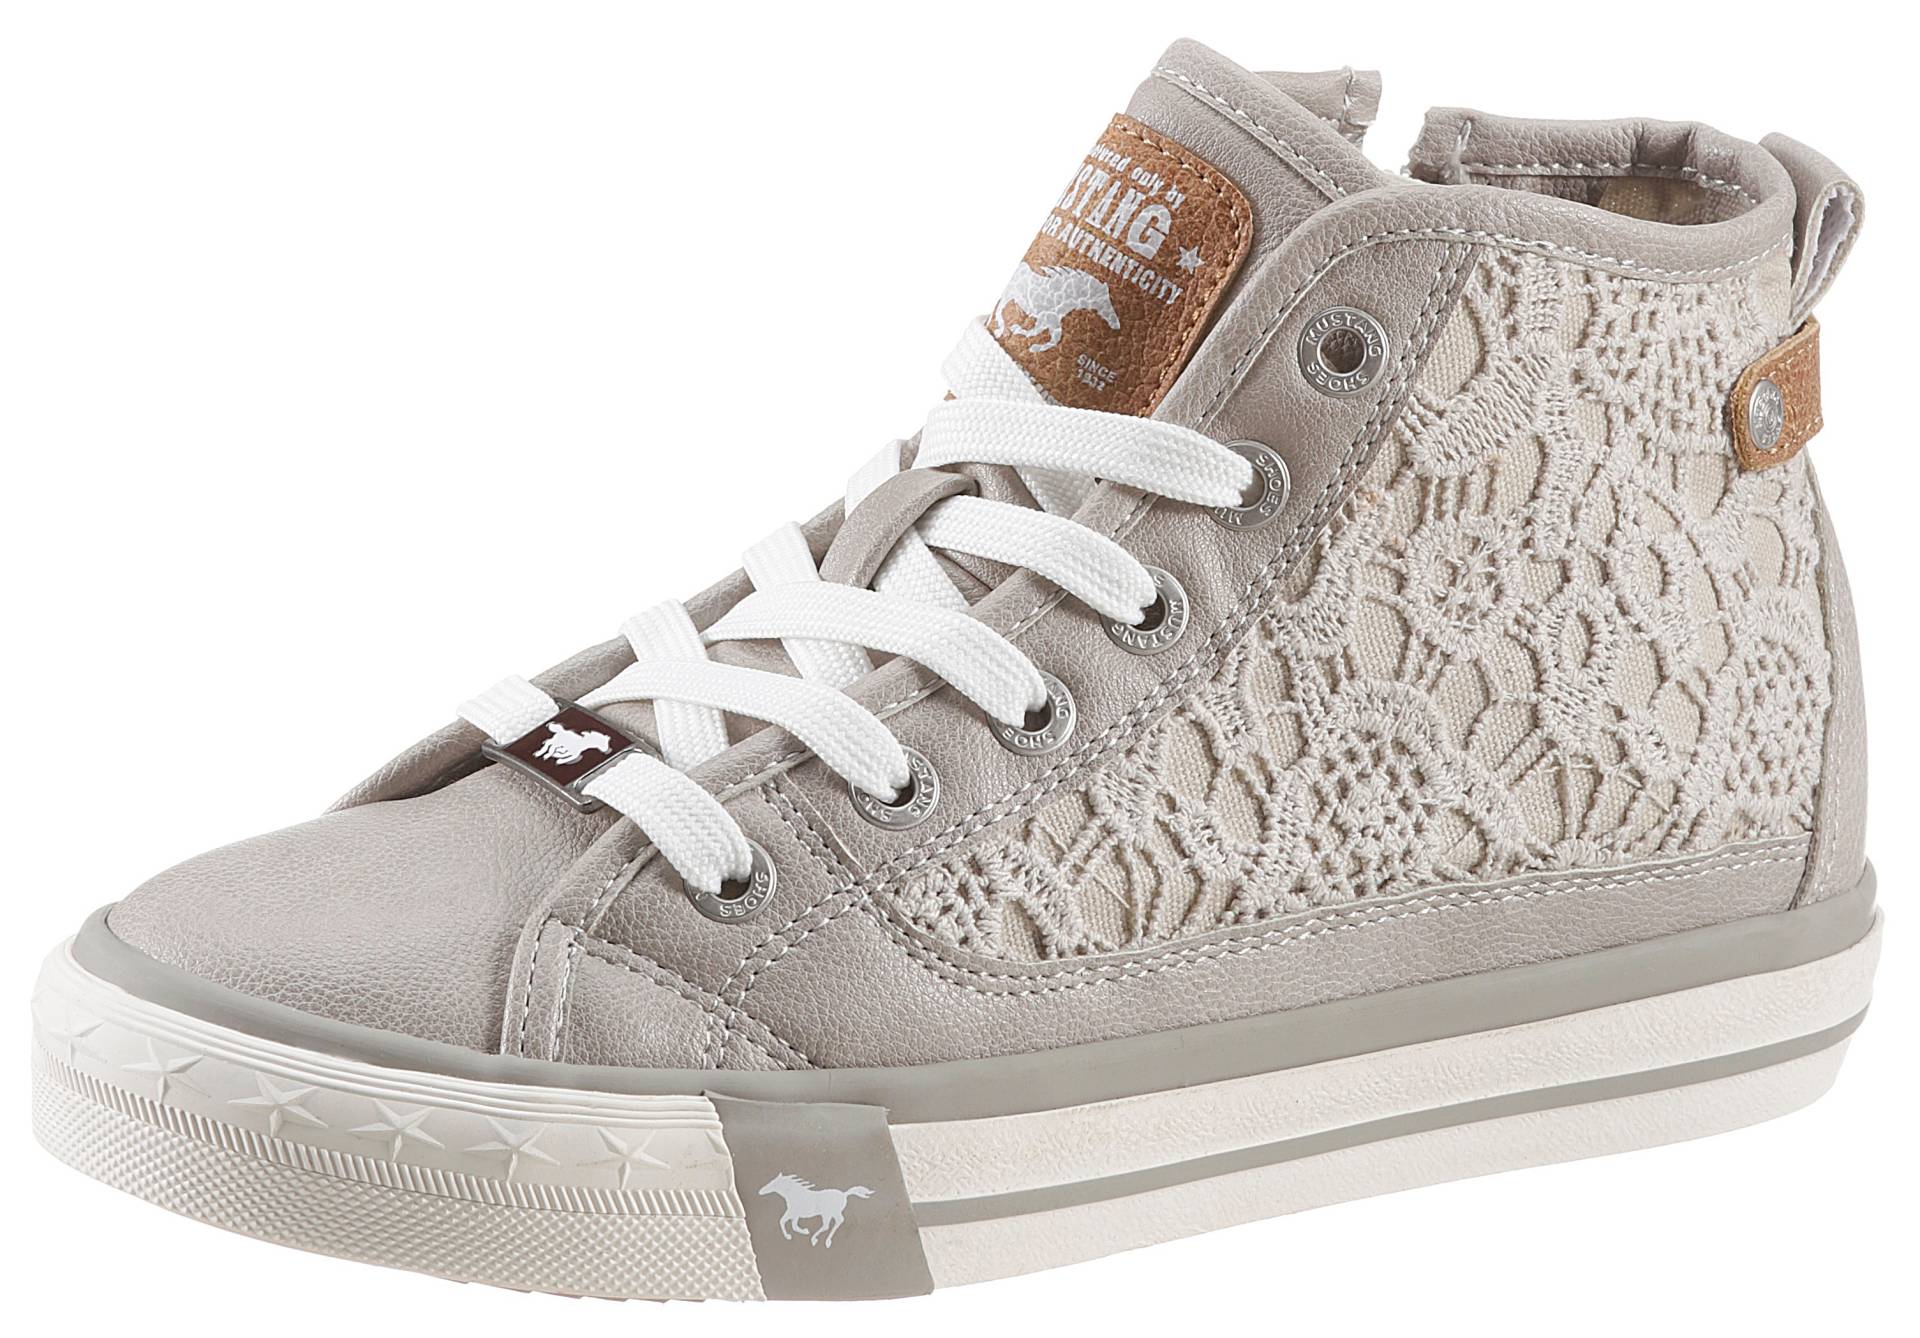 Mustang Shoes Sneaker, mit schöner Perforation von mustang shoes